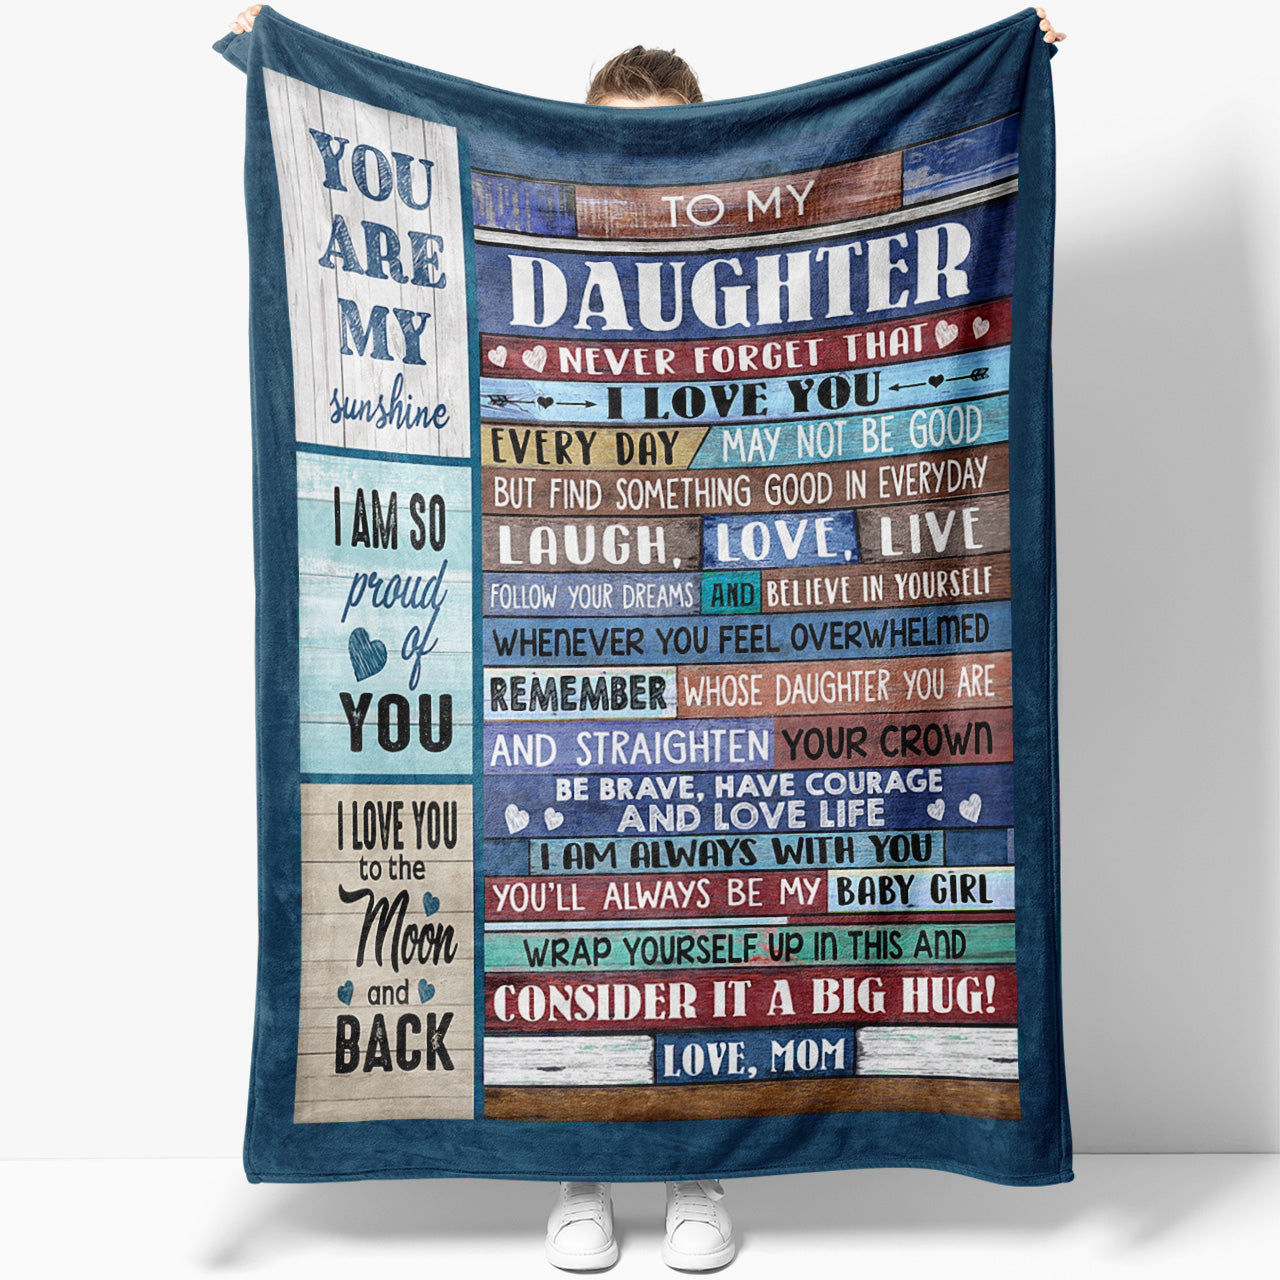 Blanket Gifts For Adult Daughter, Sentimental Gifts For Daughter From Mom, I Love You